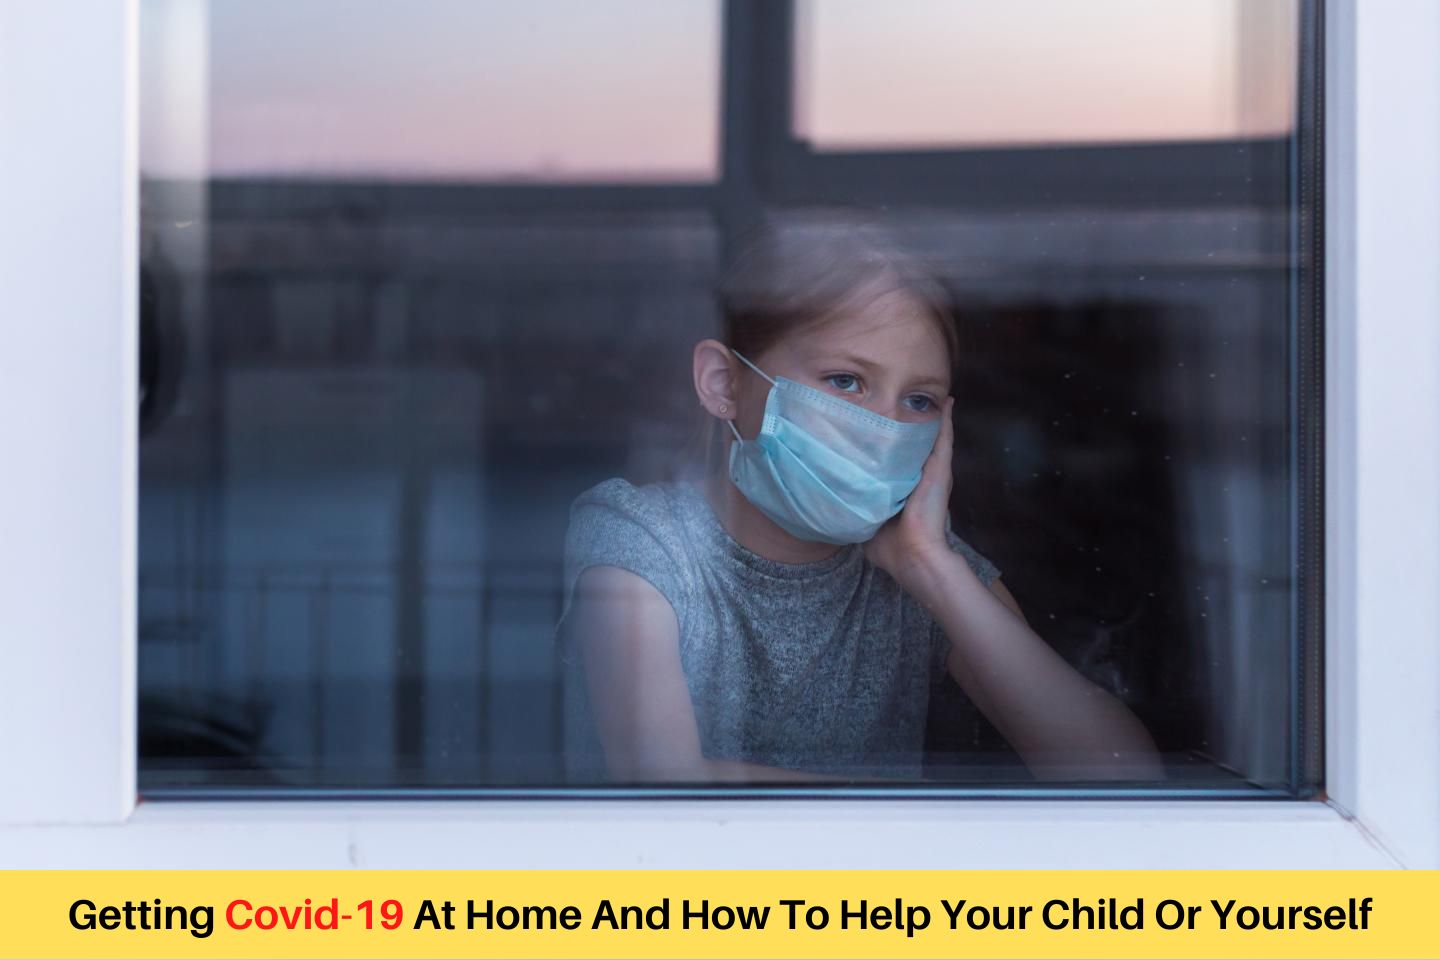 Getting Covid-19 At Home And How To Help Your Child Or Yourself